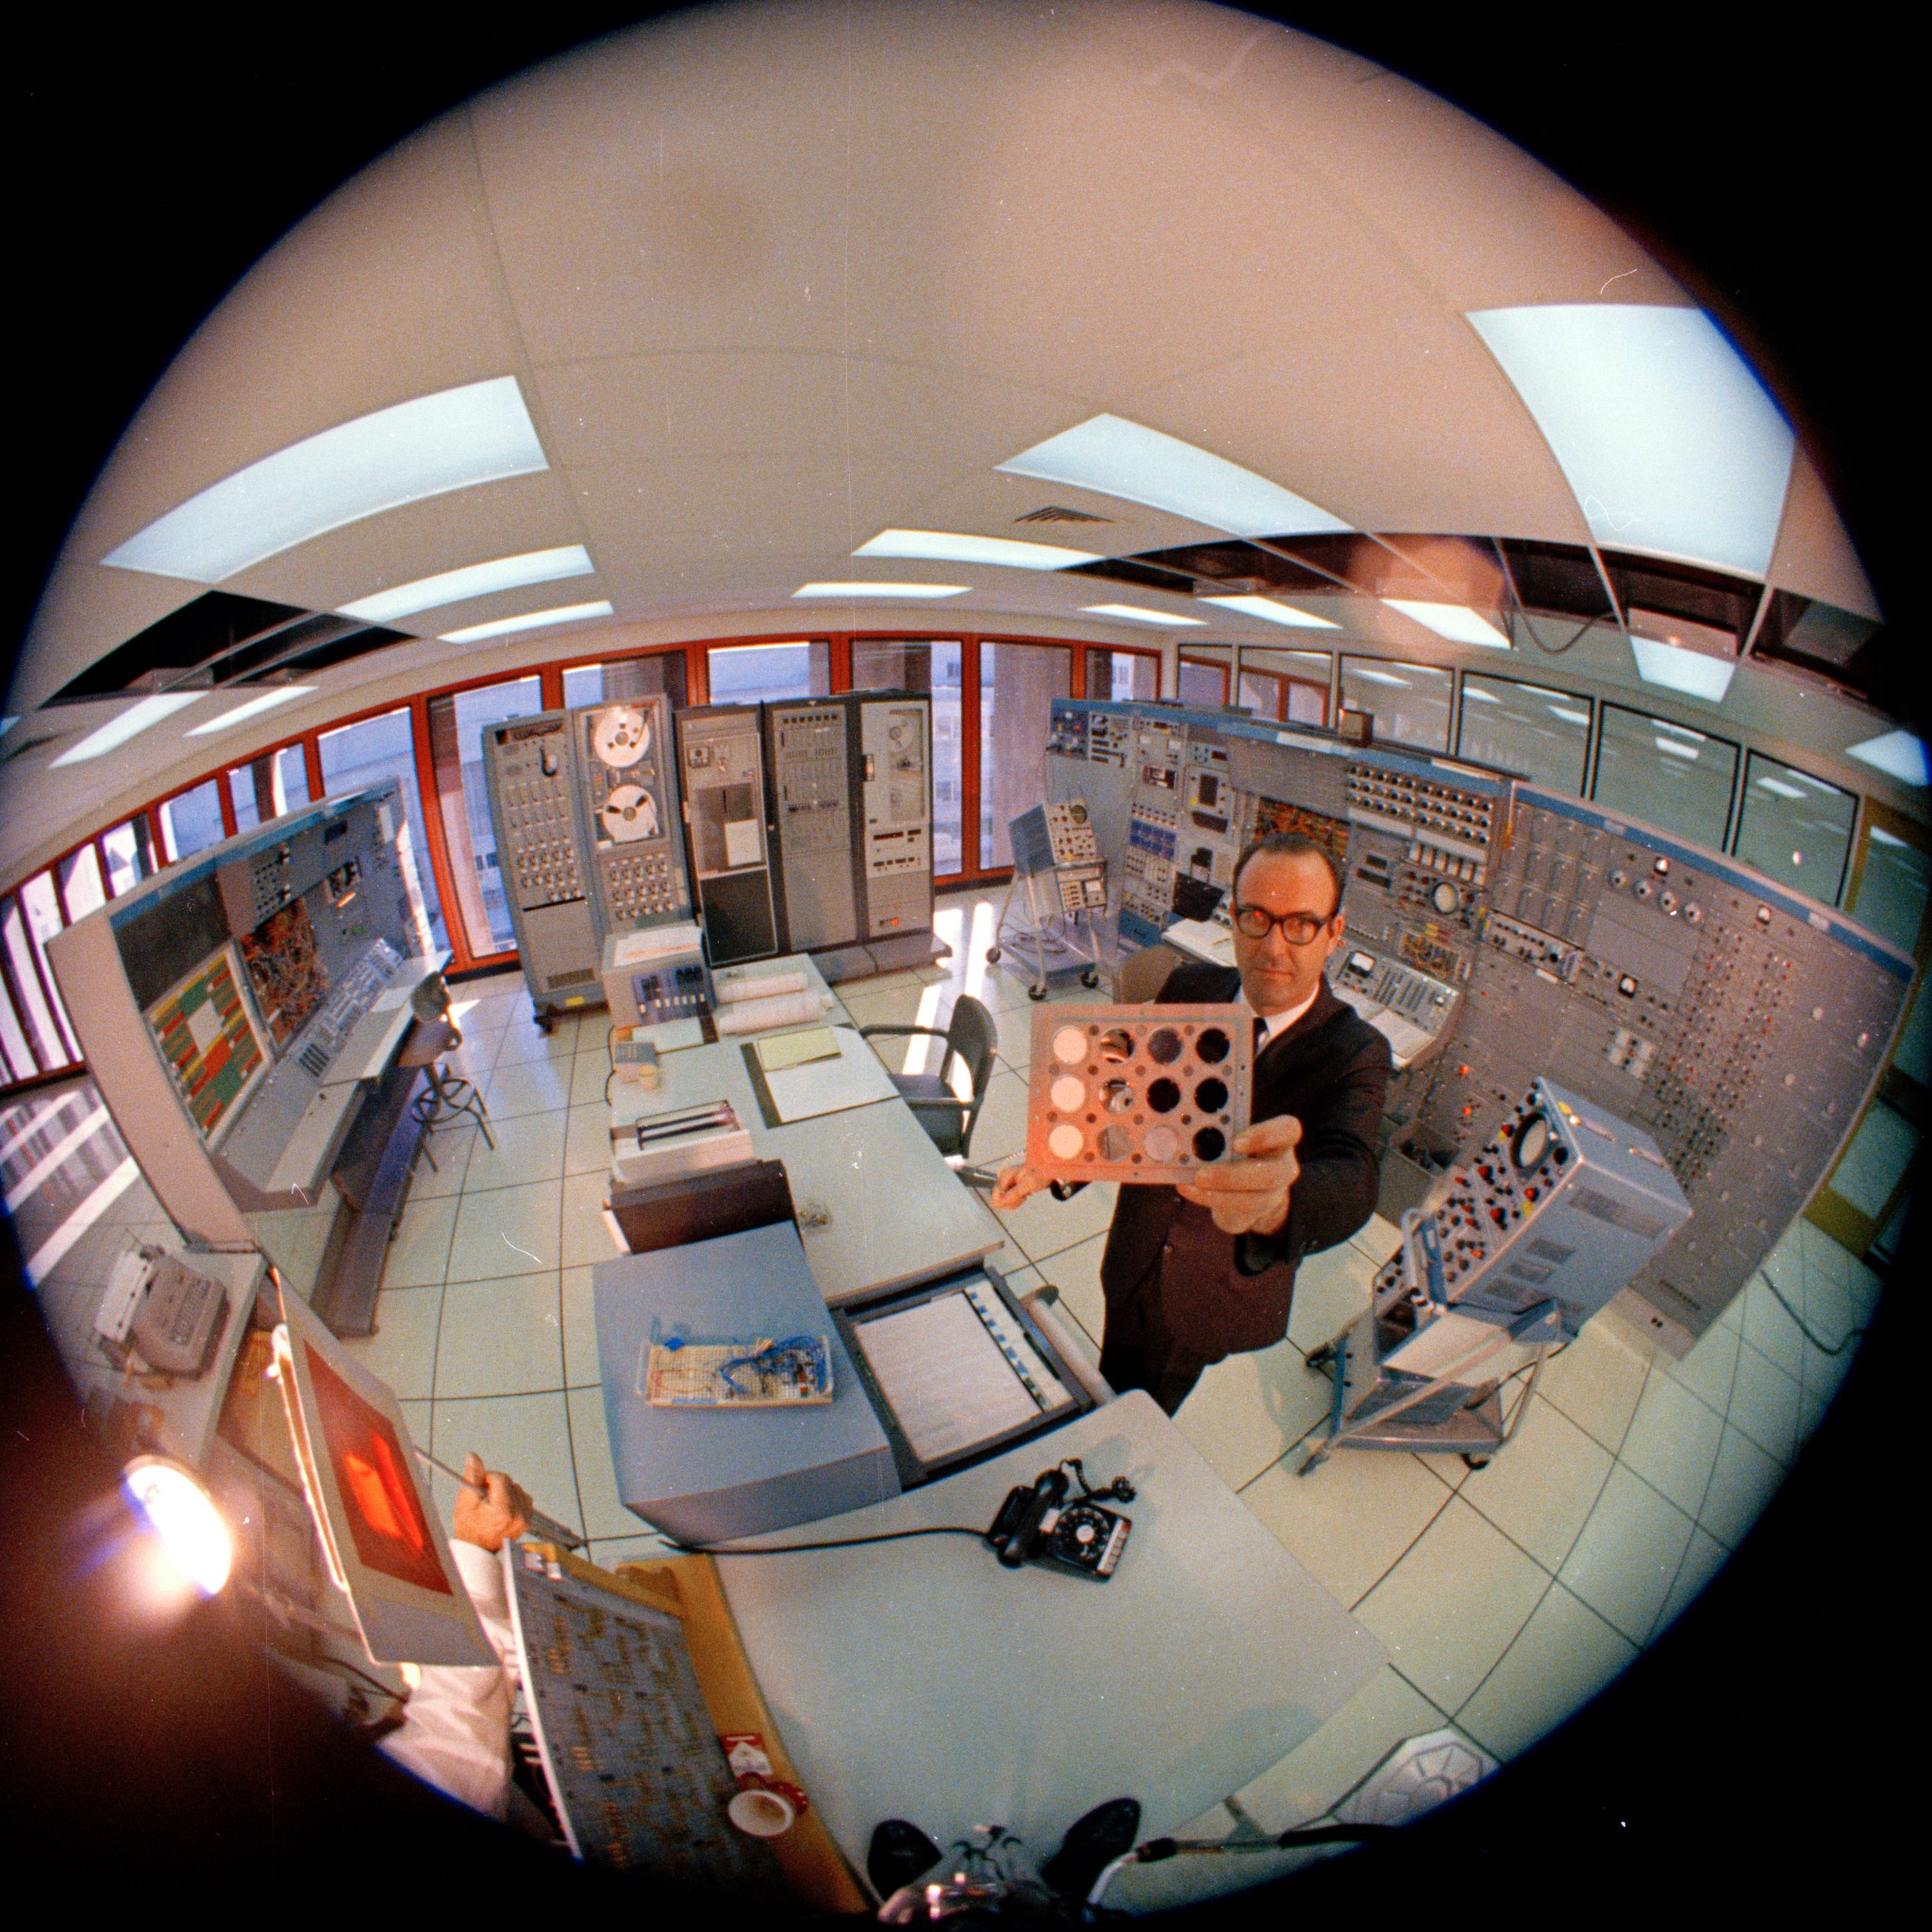 Photograph of engineer, George Holden in a computer room at Ames Research Center holding up an experimental board.